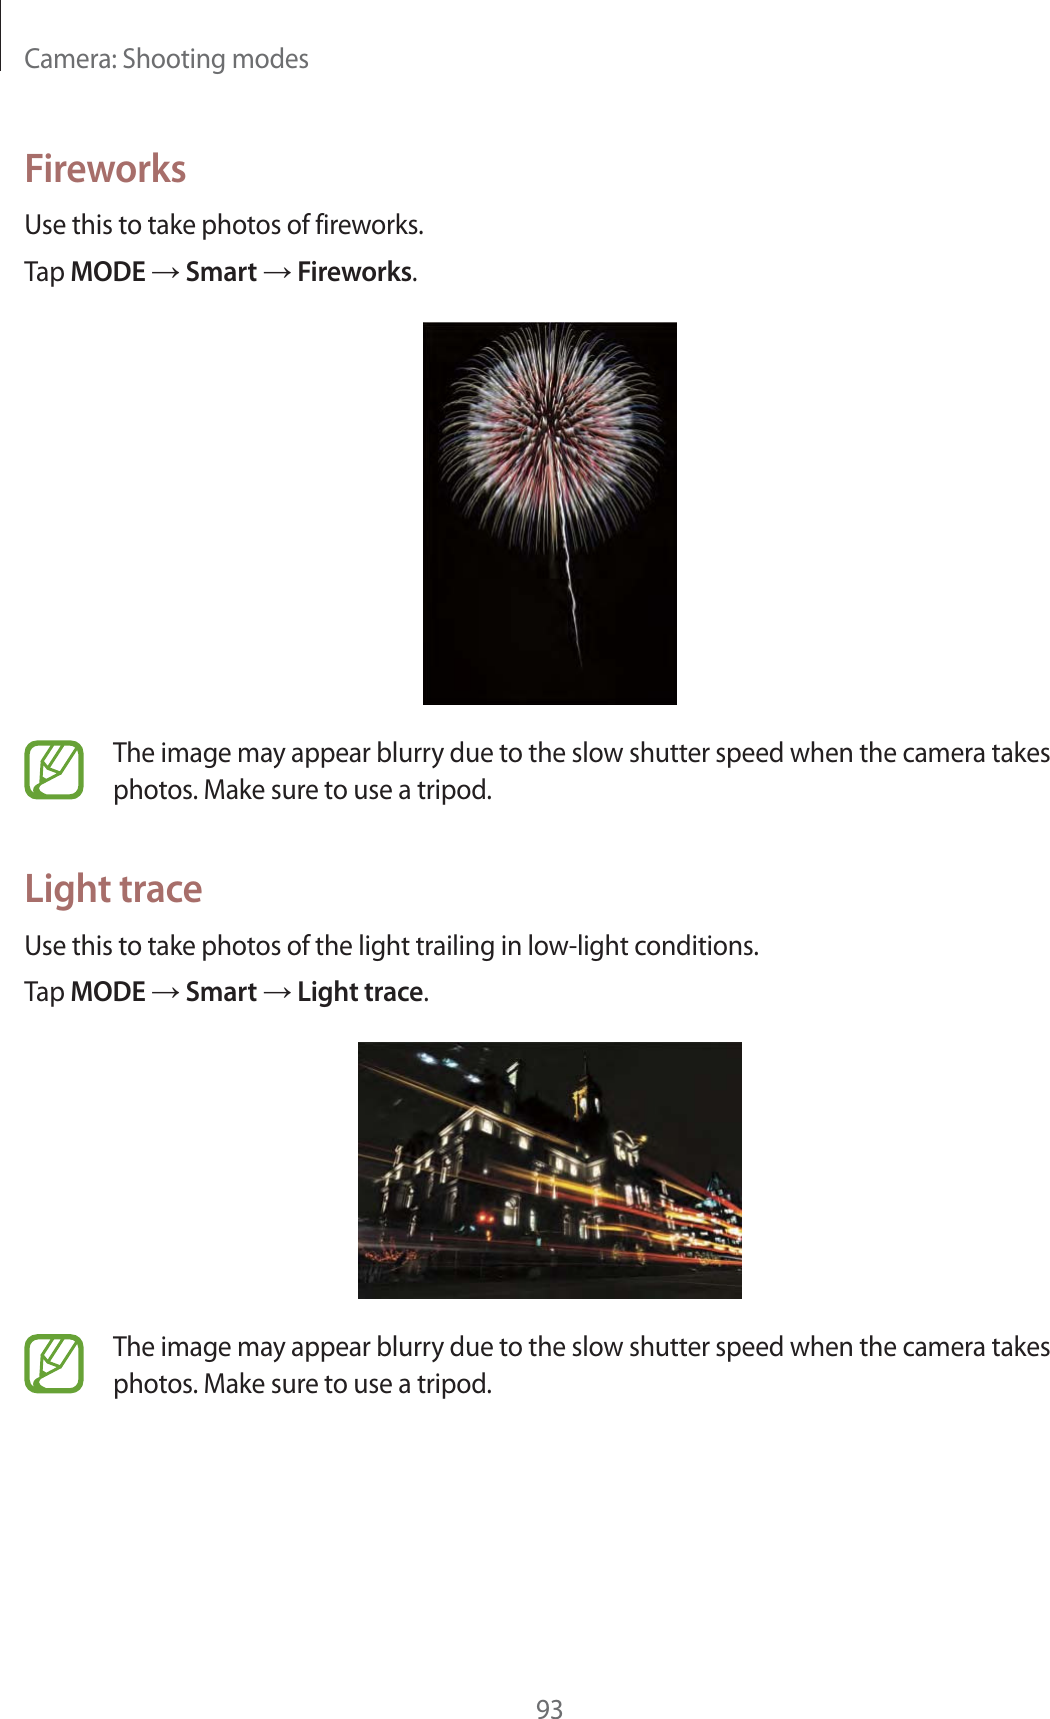 Camera: Shooting modes93FireworksUse this to take photos of fireworks.Tap MODE  Smart  Fireworks.The image may appear blurry due to the slow shutter speed when the camera takes photos. Make sure to use a tripod.Light traceUse this to take photos of the light trailing in low-light conditions.Tap MODE  Smart  Light trace.The image may appear blurry due to the slow shutter speed when the camera takes photos. Make sure to use a tripod.